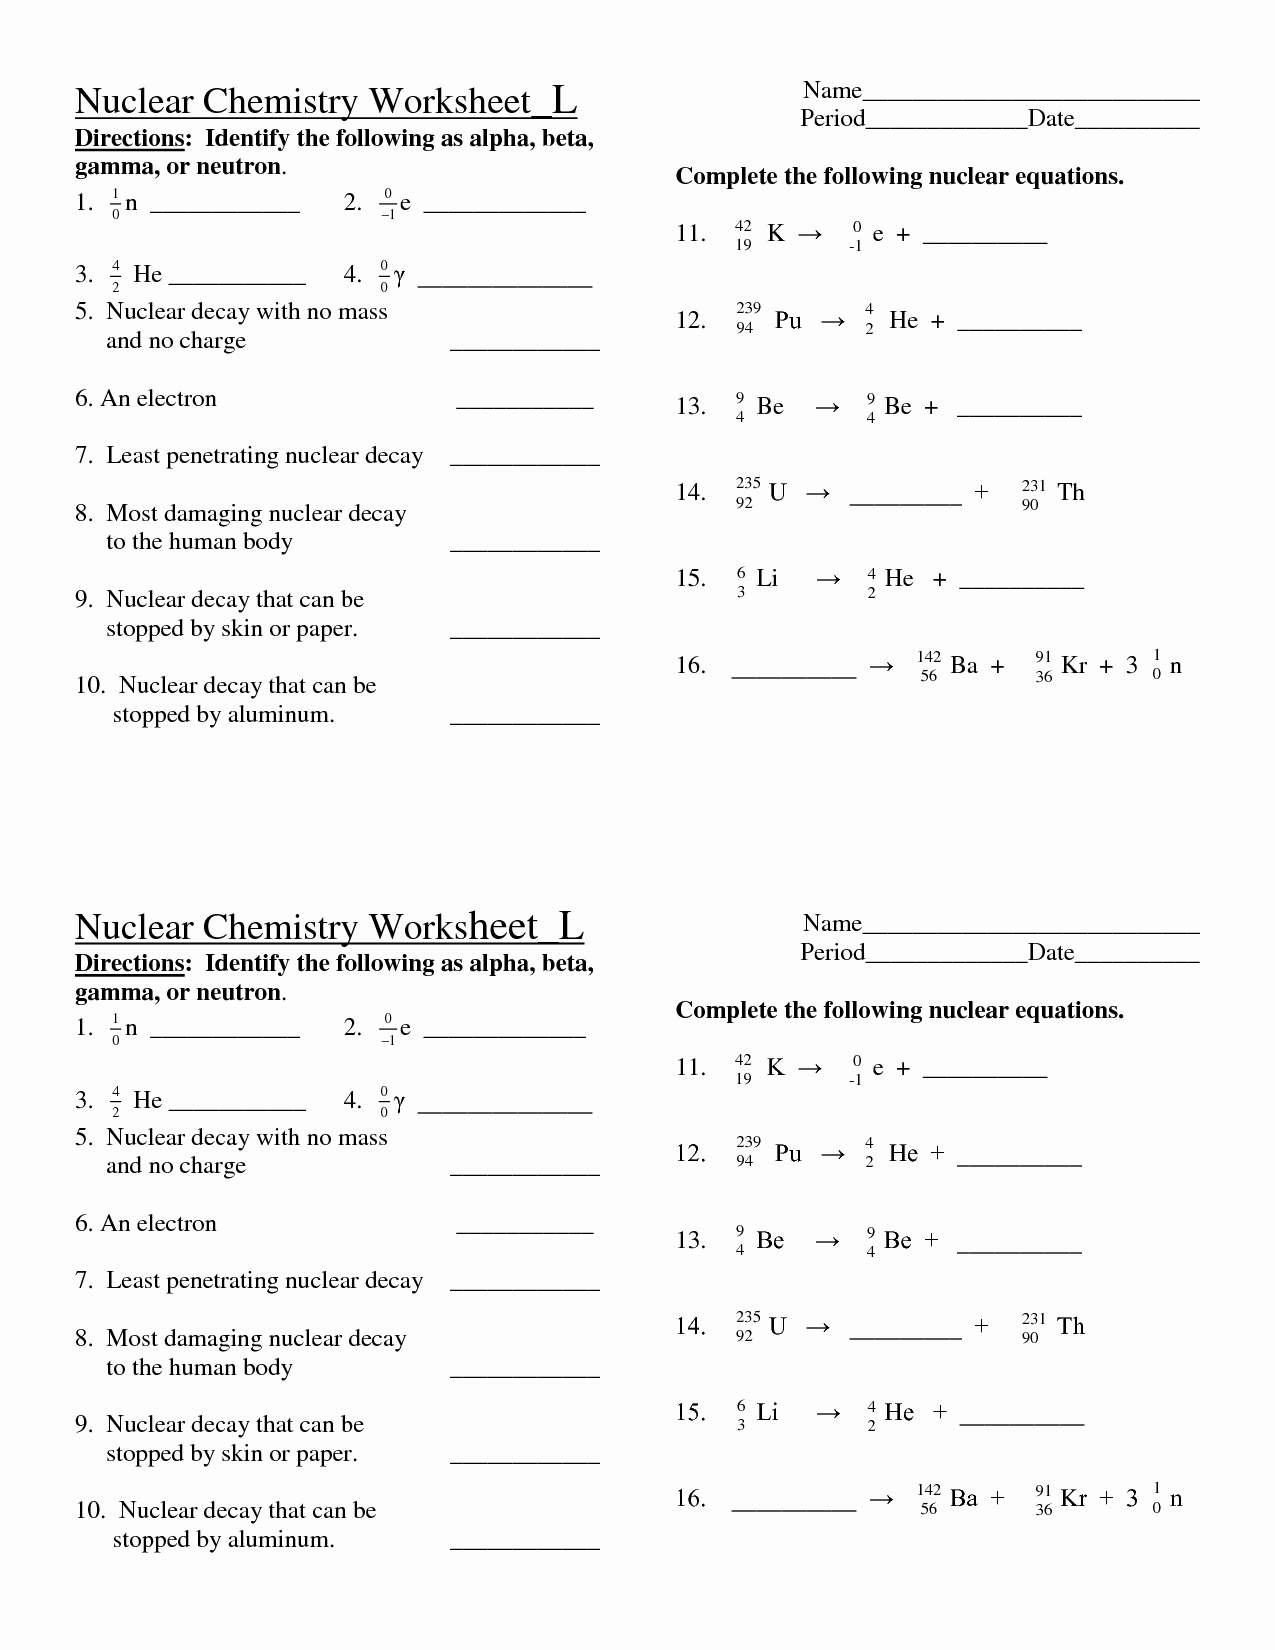 Nuclear Chemistry Worksheet Answer Key Lovely Nuclear Chemistry Worksheet Doc